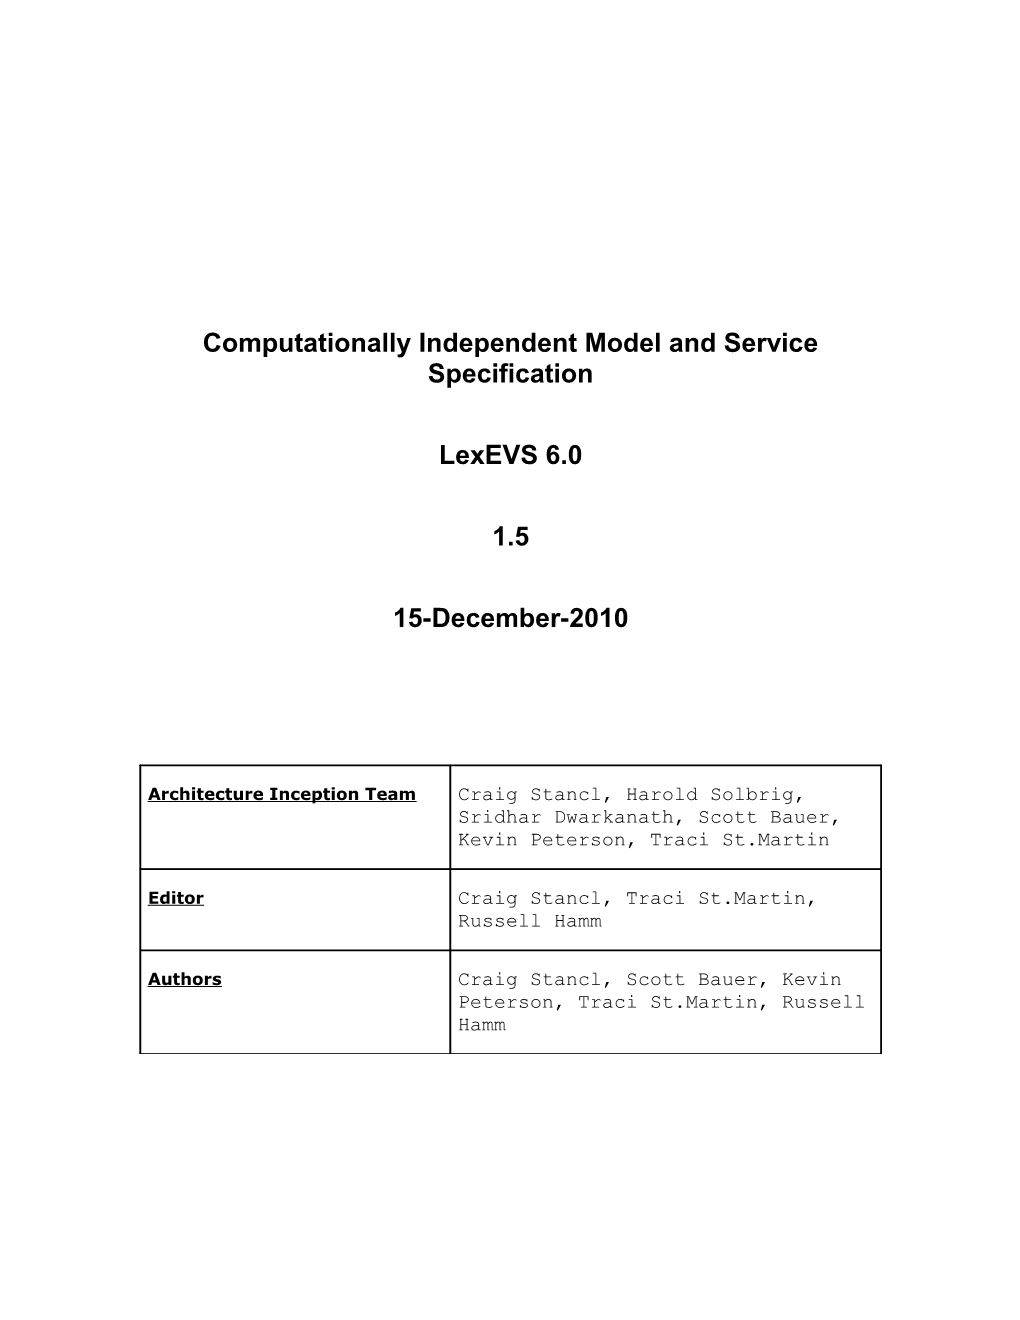 Computationally Independent Model and Service Specification